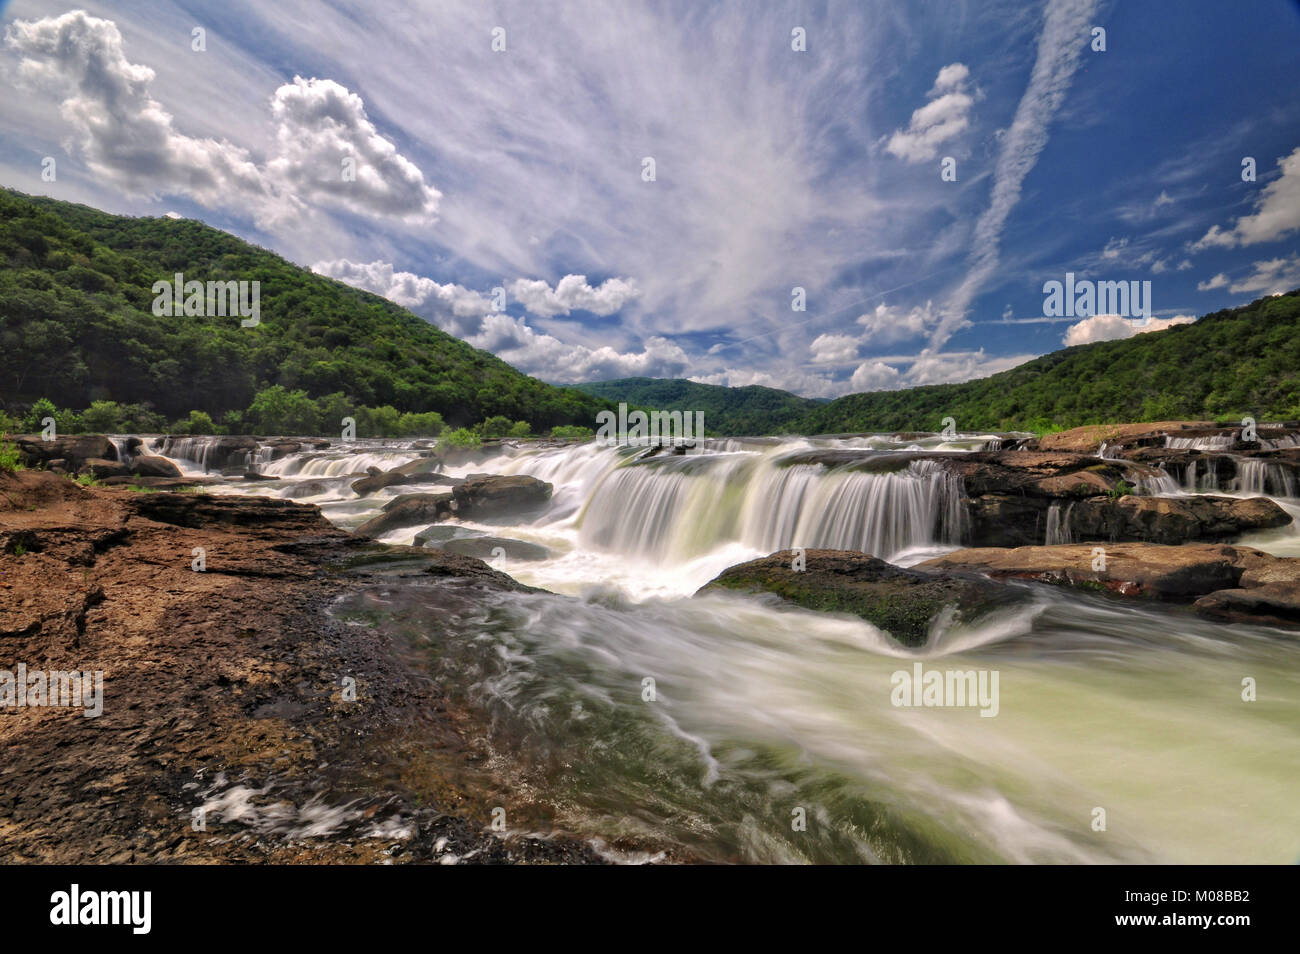 Iconic Sandstone Falls of the New River Gorge West Virginia Stock Photo